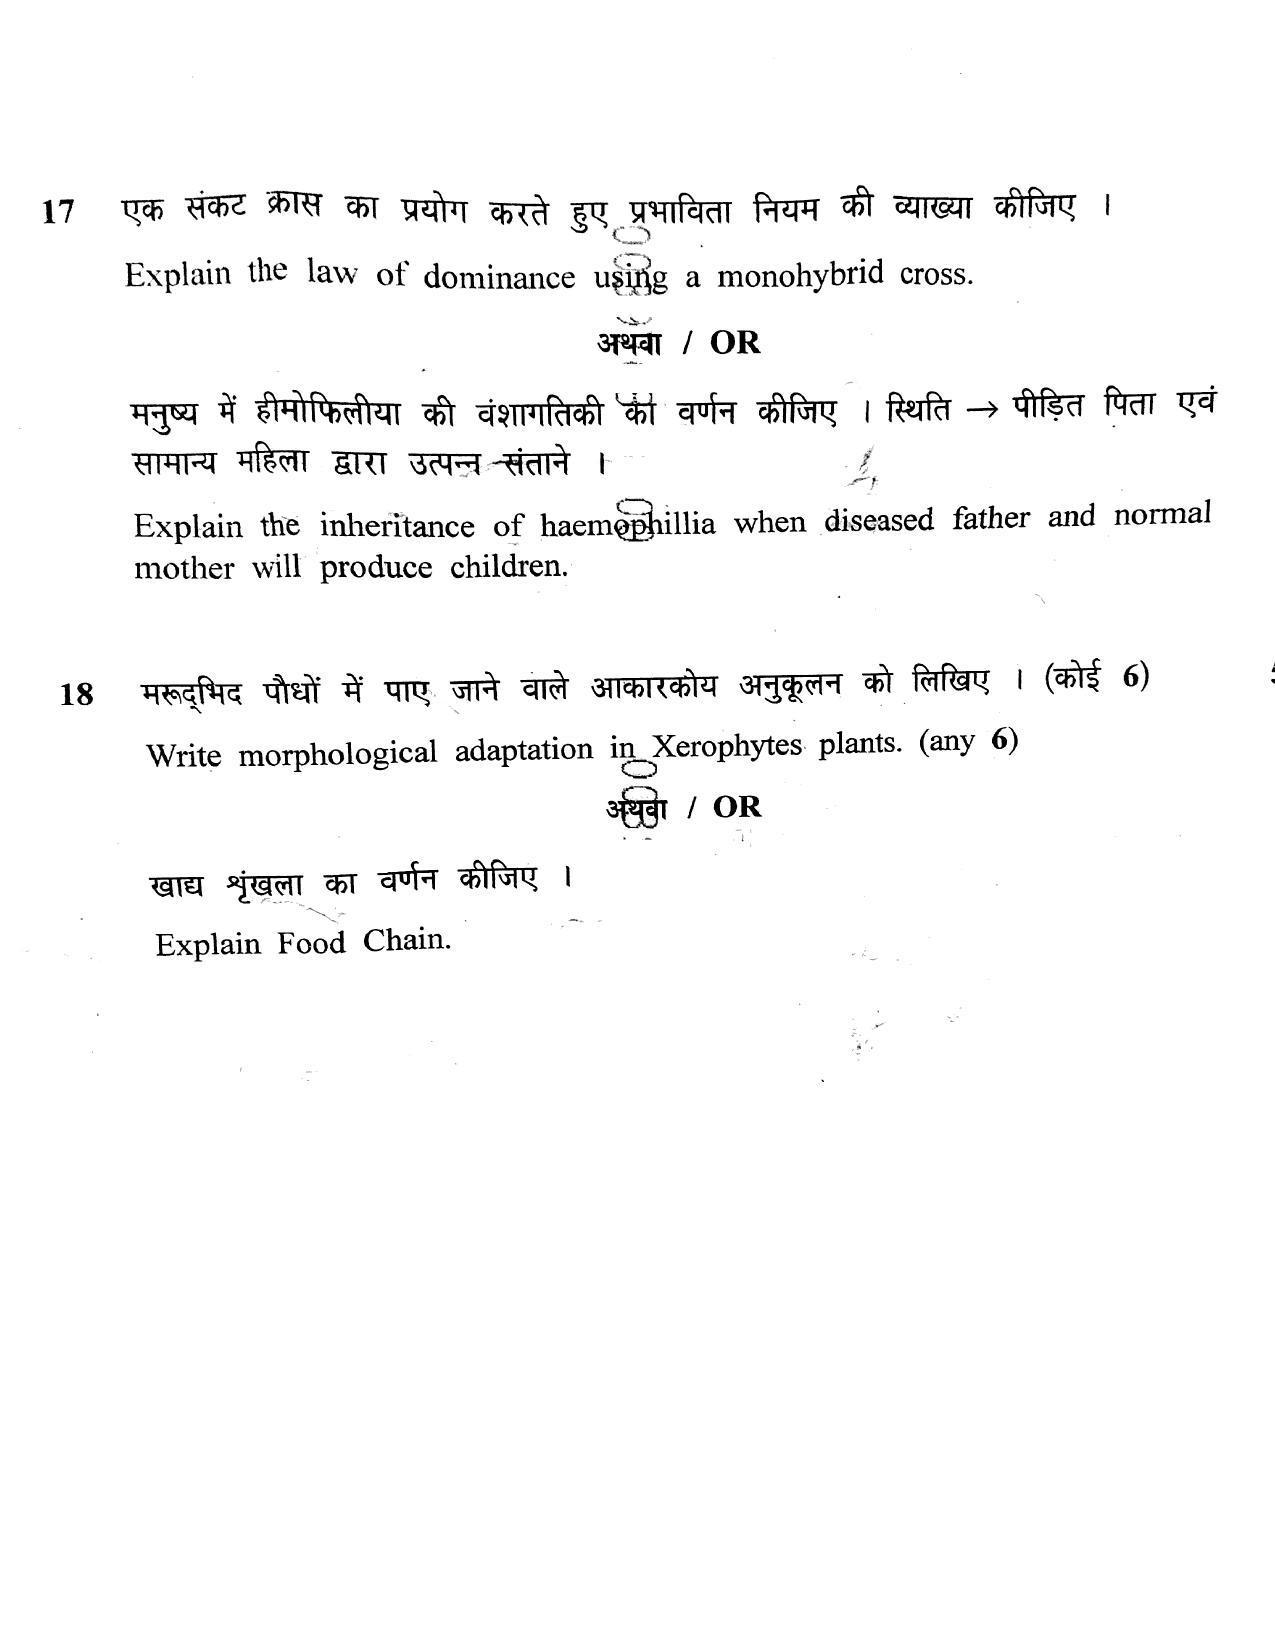 MP Board Class 12 Biology 2020 Question Paper - Page 8